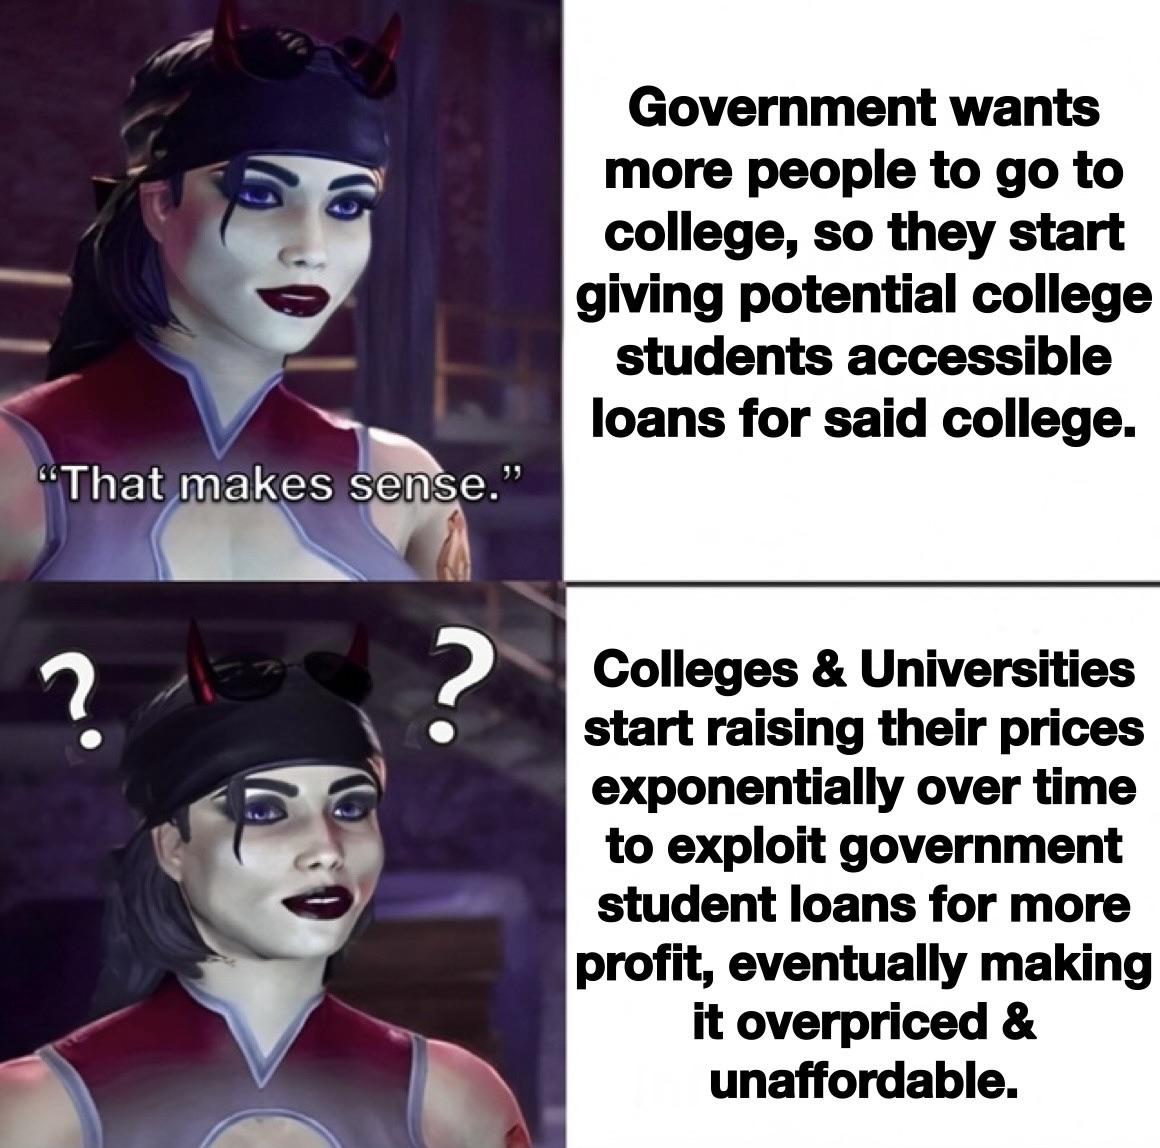 dank memes  - head - "That makes sense." ? ? Government wants more people to go to college, so they start giving potential college students accessible loans for said college. Colleges & Universities start raising their prices exponentially over time to ex